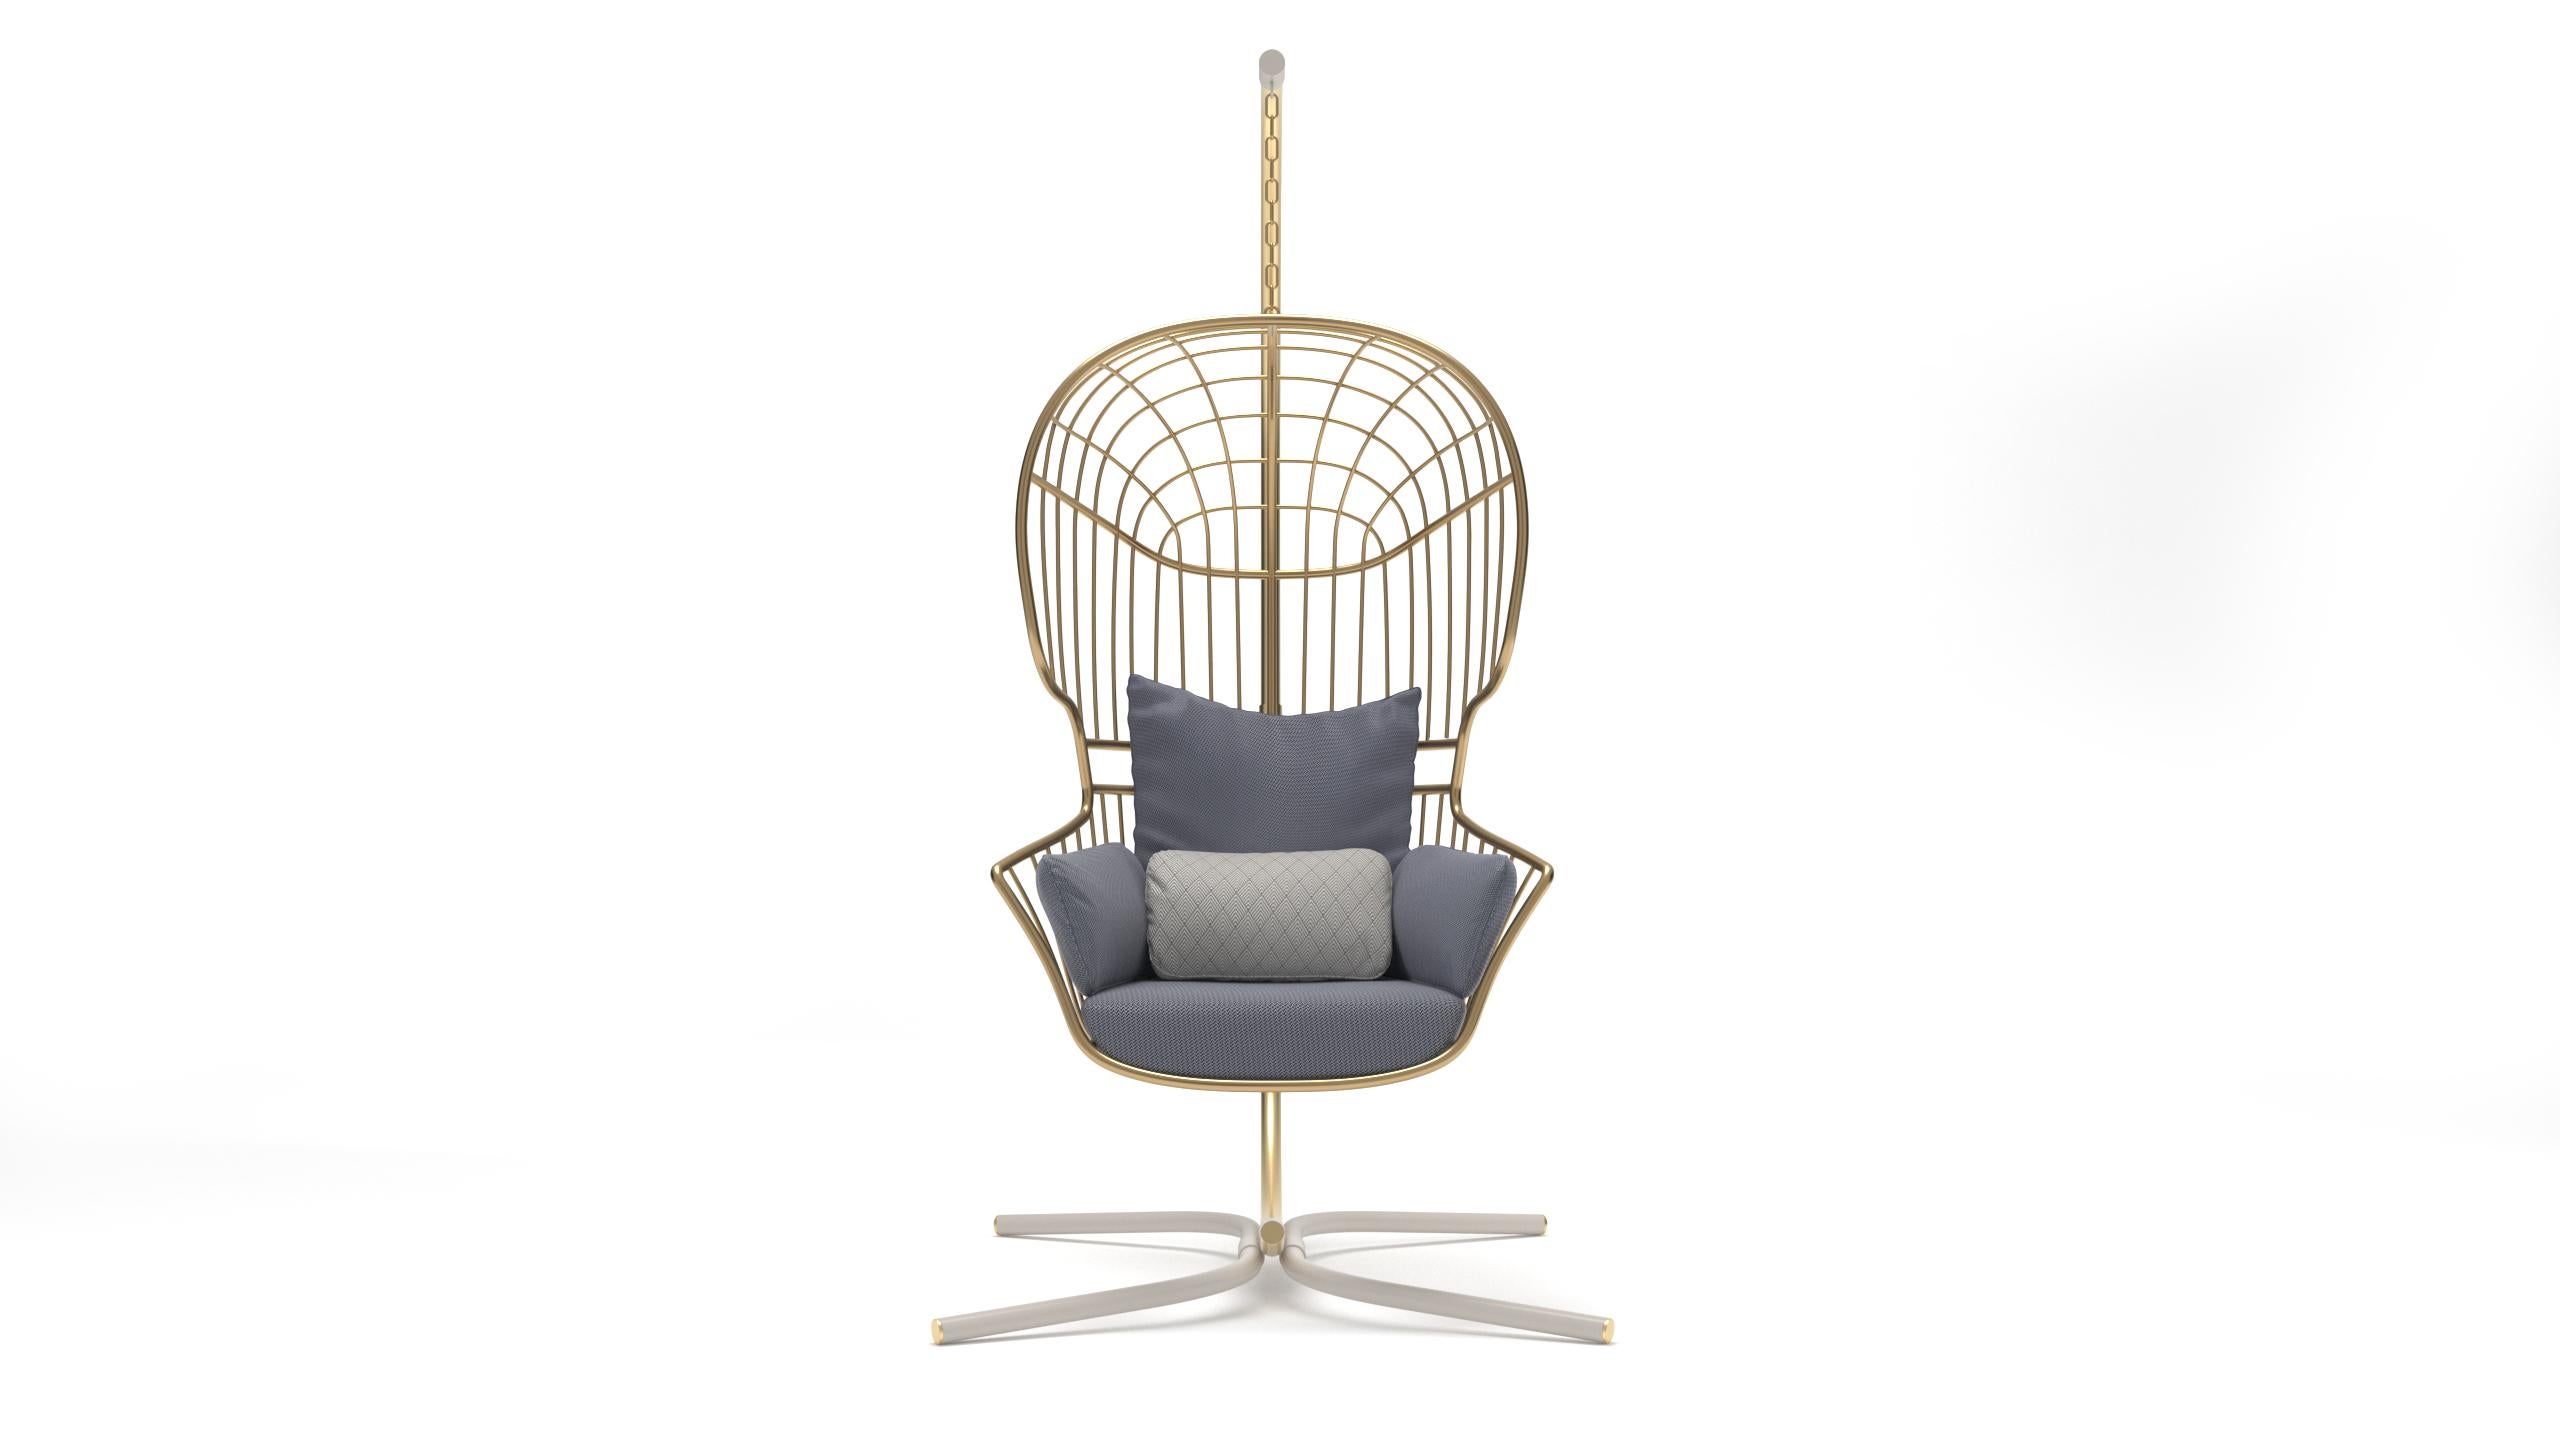 Nodo hanging armchair 

The most luxurious and sophisticated outdoor furniture piece that will assure elegance and a comfortable space to enjoy some relaxing time outdoors. Looks perfect both in indoor and outdoor projects.

The whole design of